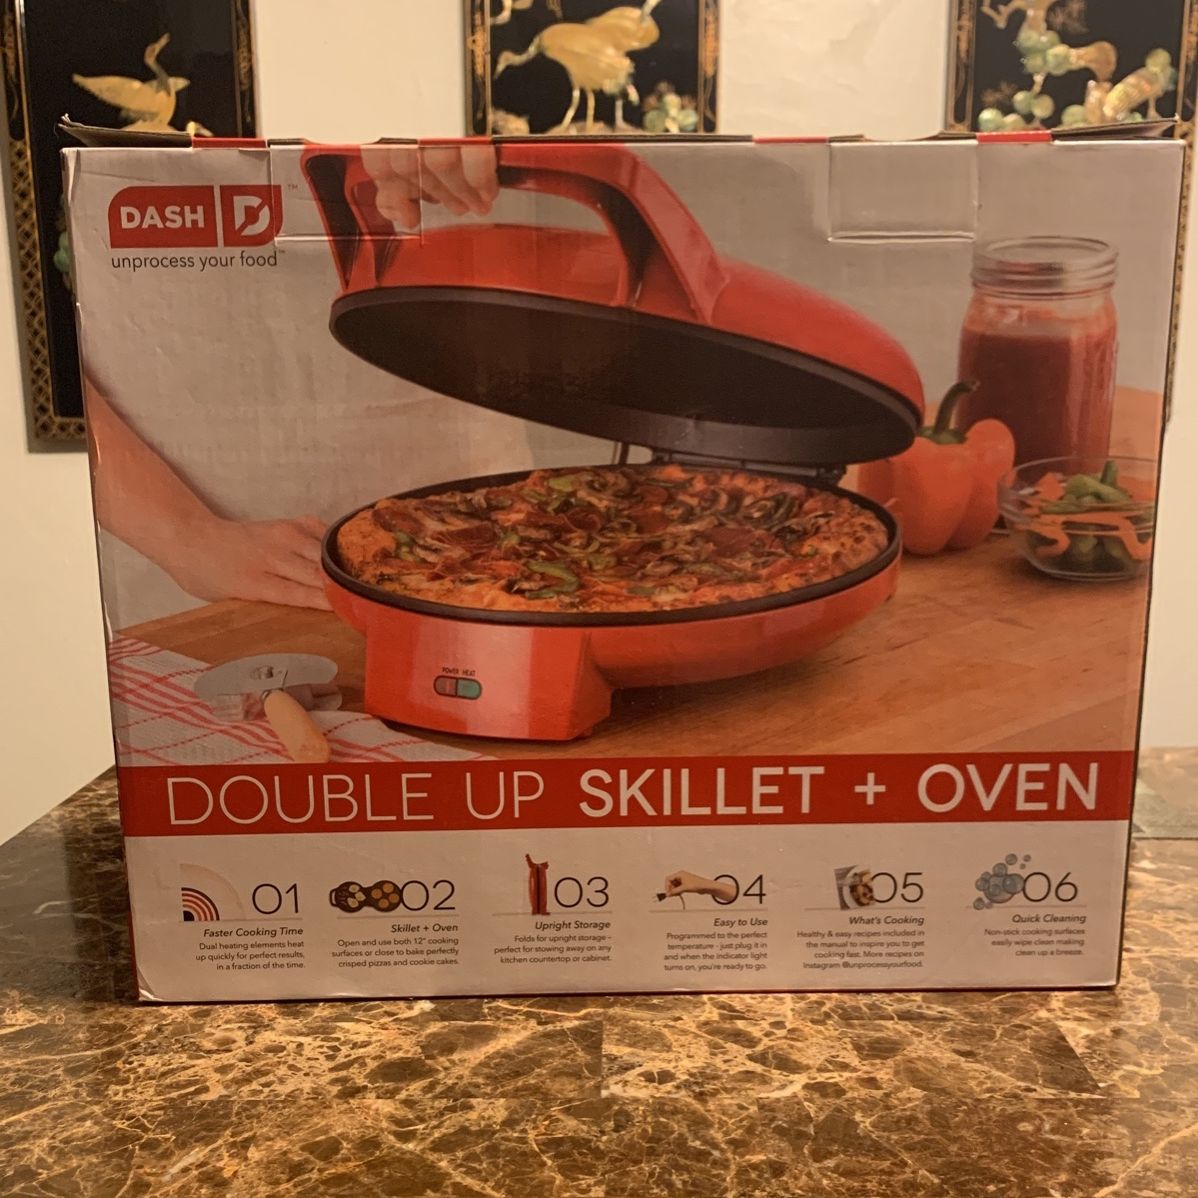 DASH Double Up Skillet Oven 